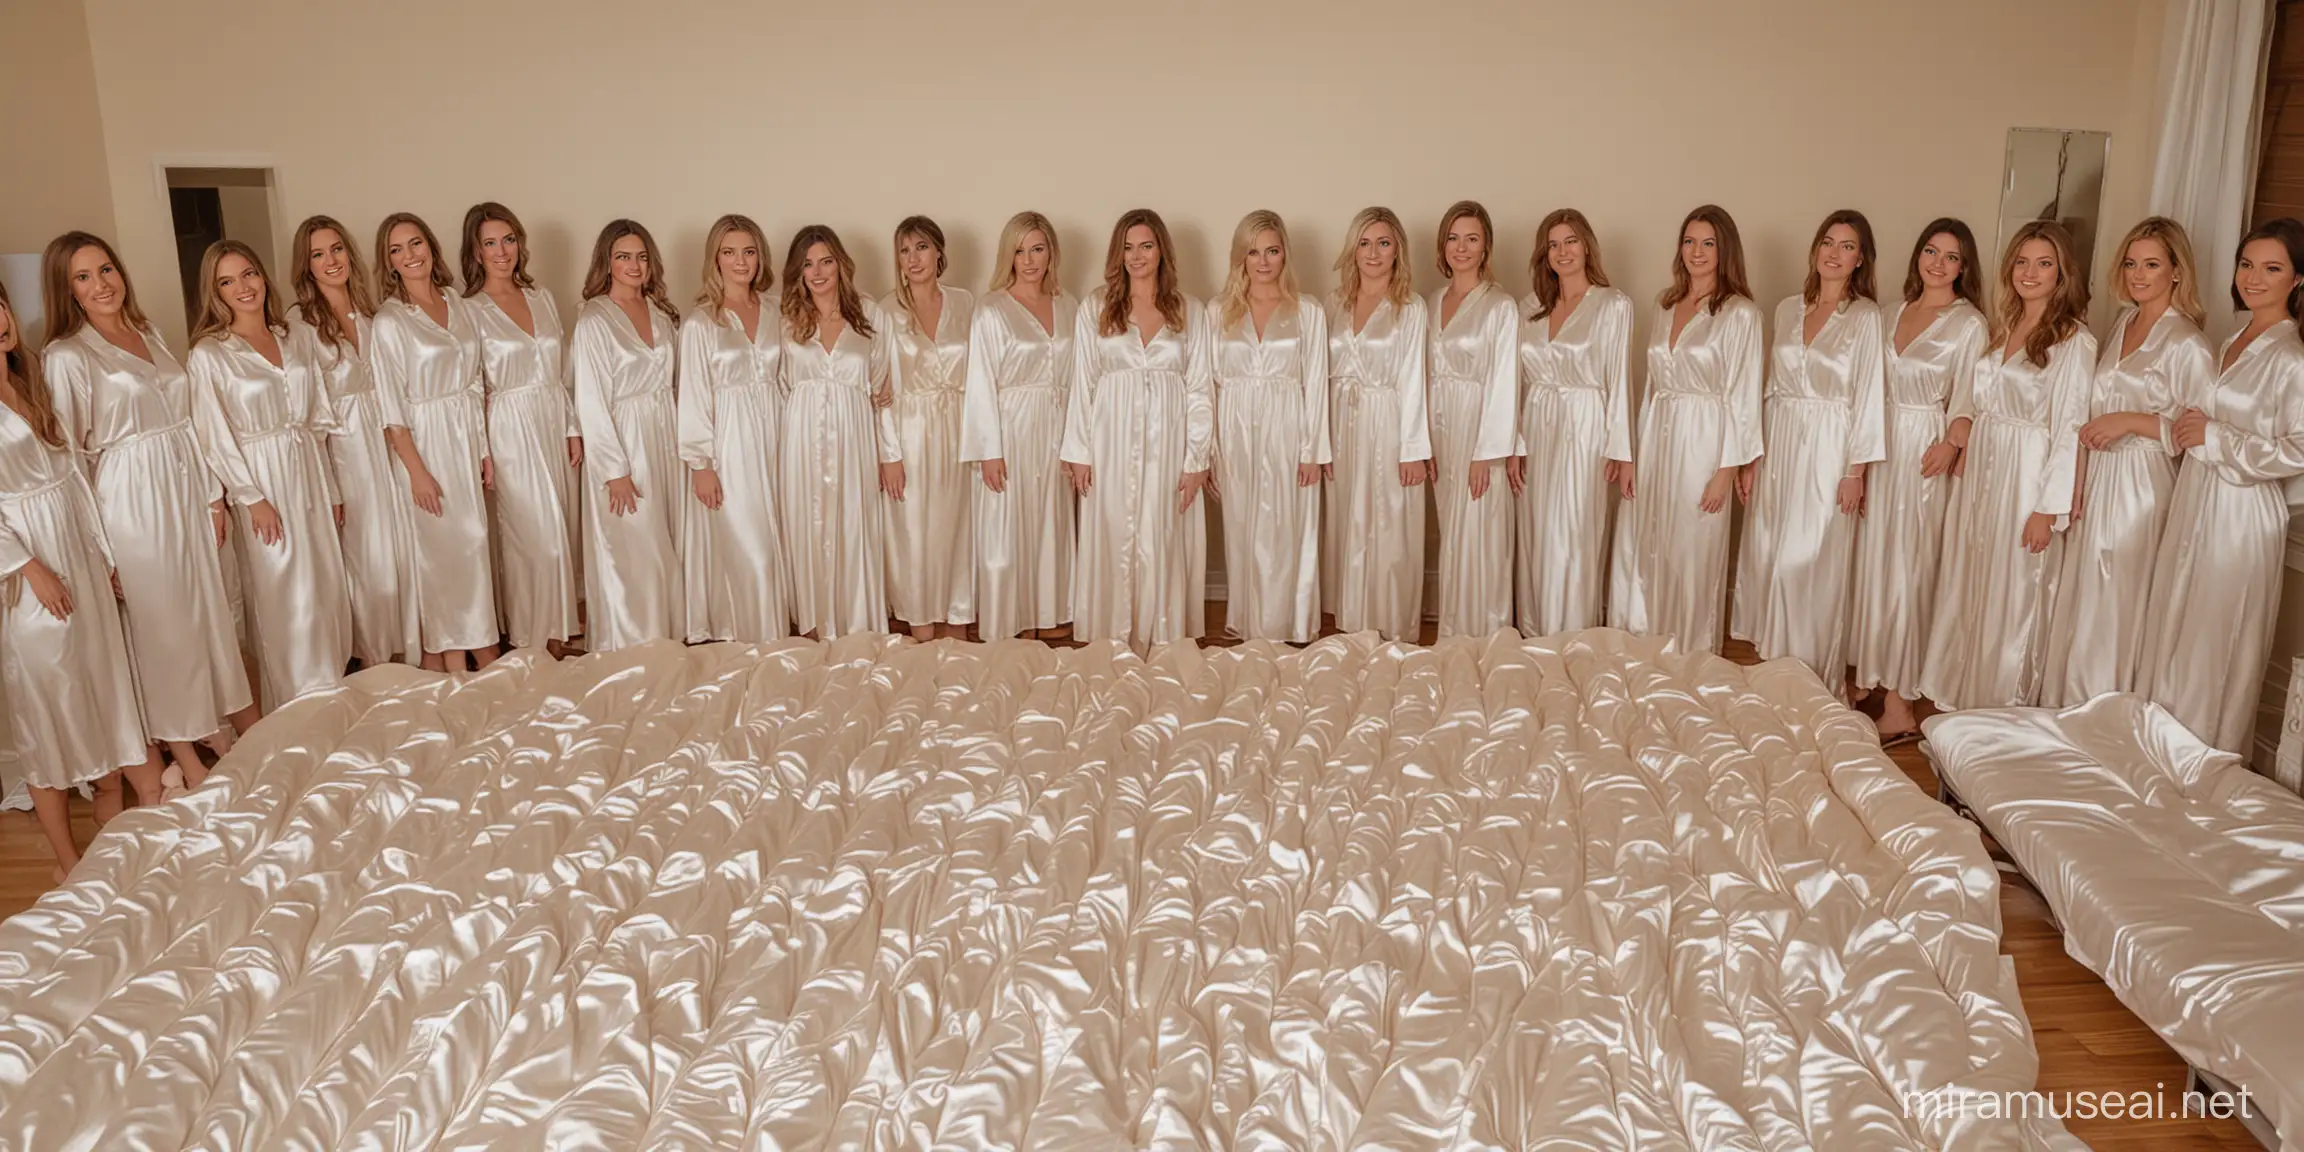 30 women in creamy white satin nightgowns stand in 10 rows on a huge satin bed look you